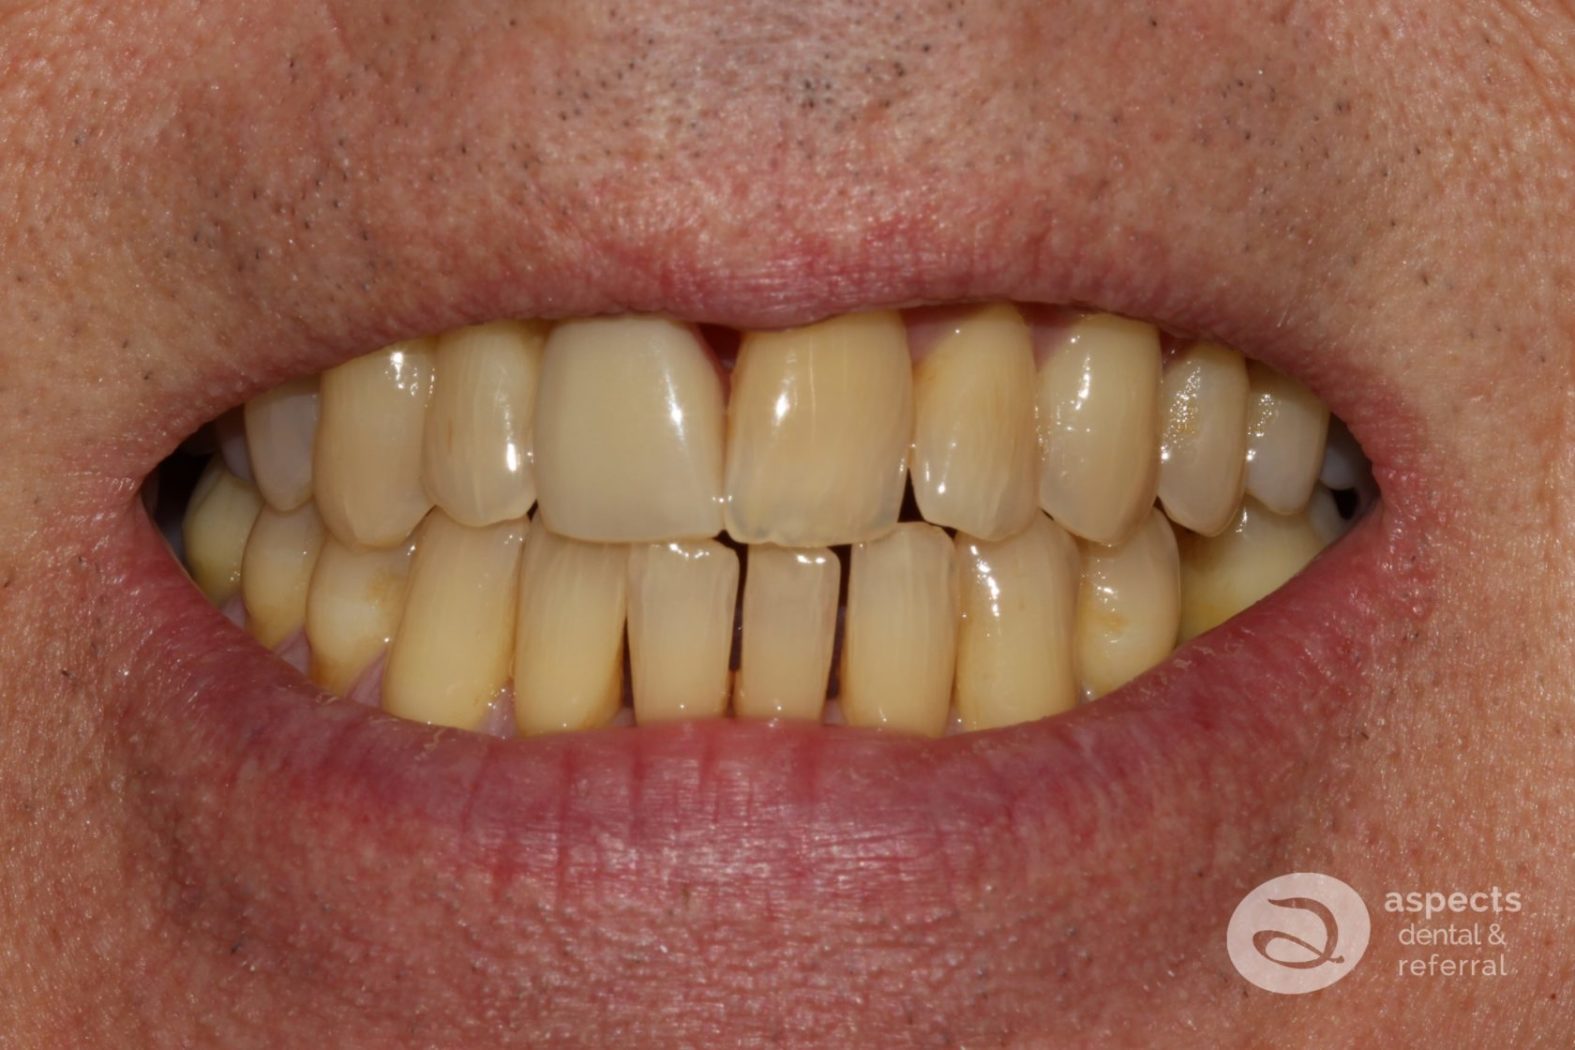 Treatment Of The Month - Existing Single Tooth Denture & Discoloured Teeth Before Photo - November 2022 Email Newsletter